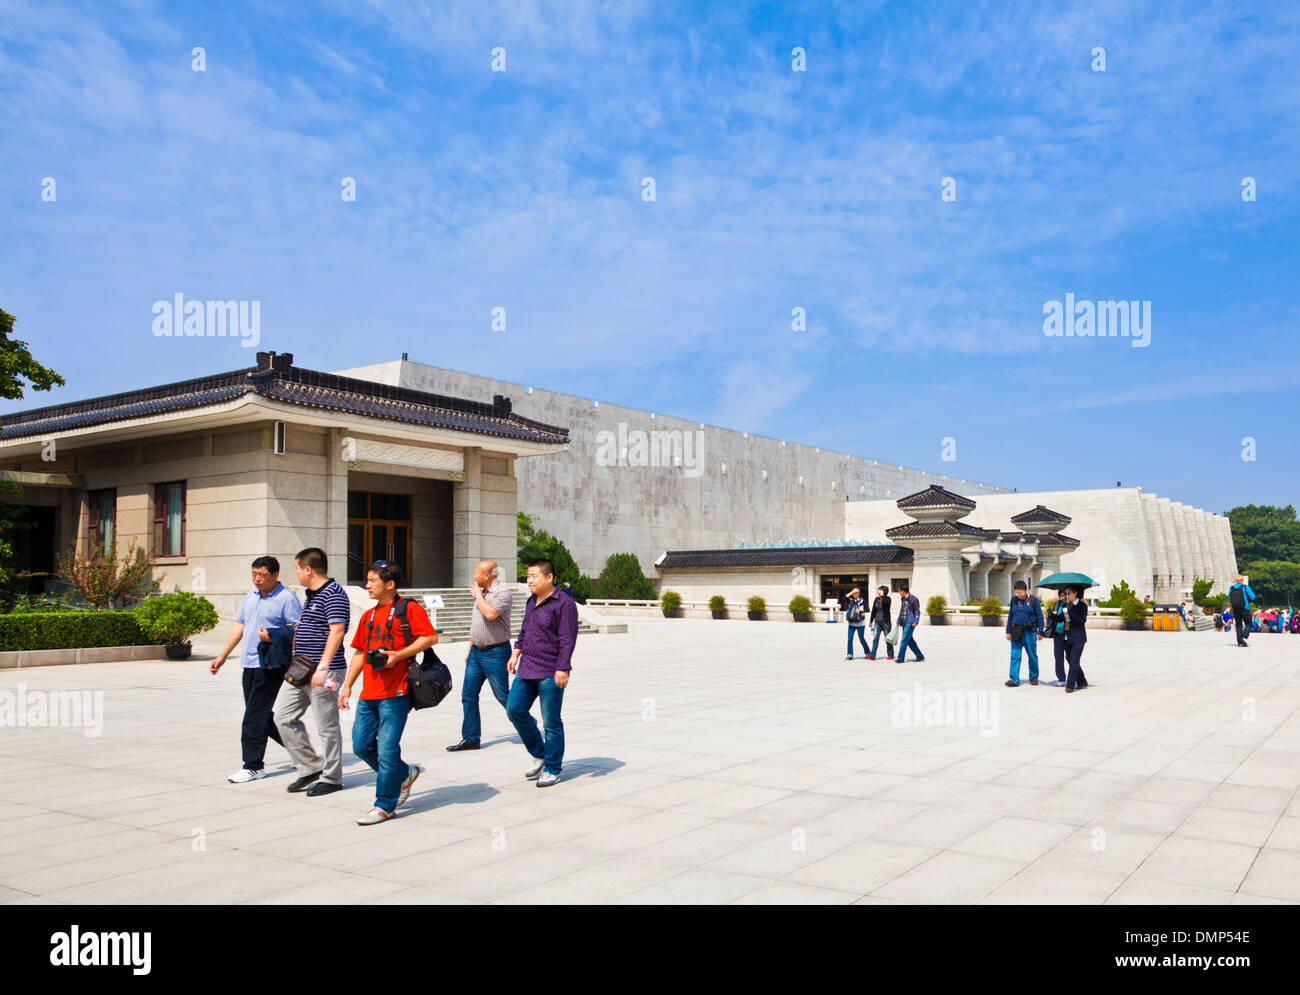 tourists at the Terracotta Army museum, Xian, Shaanxi Province, PRC, People's Republic of China, Asia Stock Photo